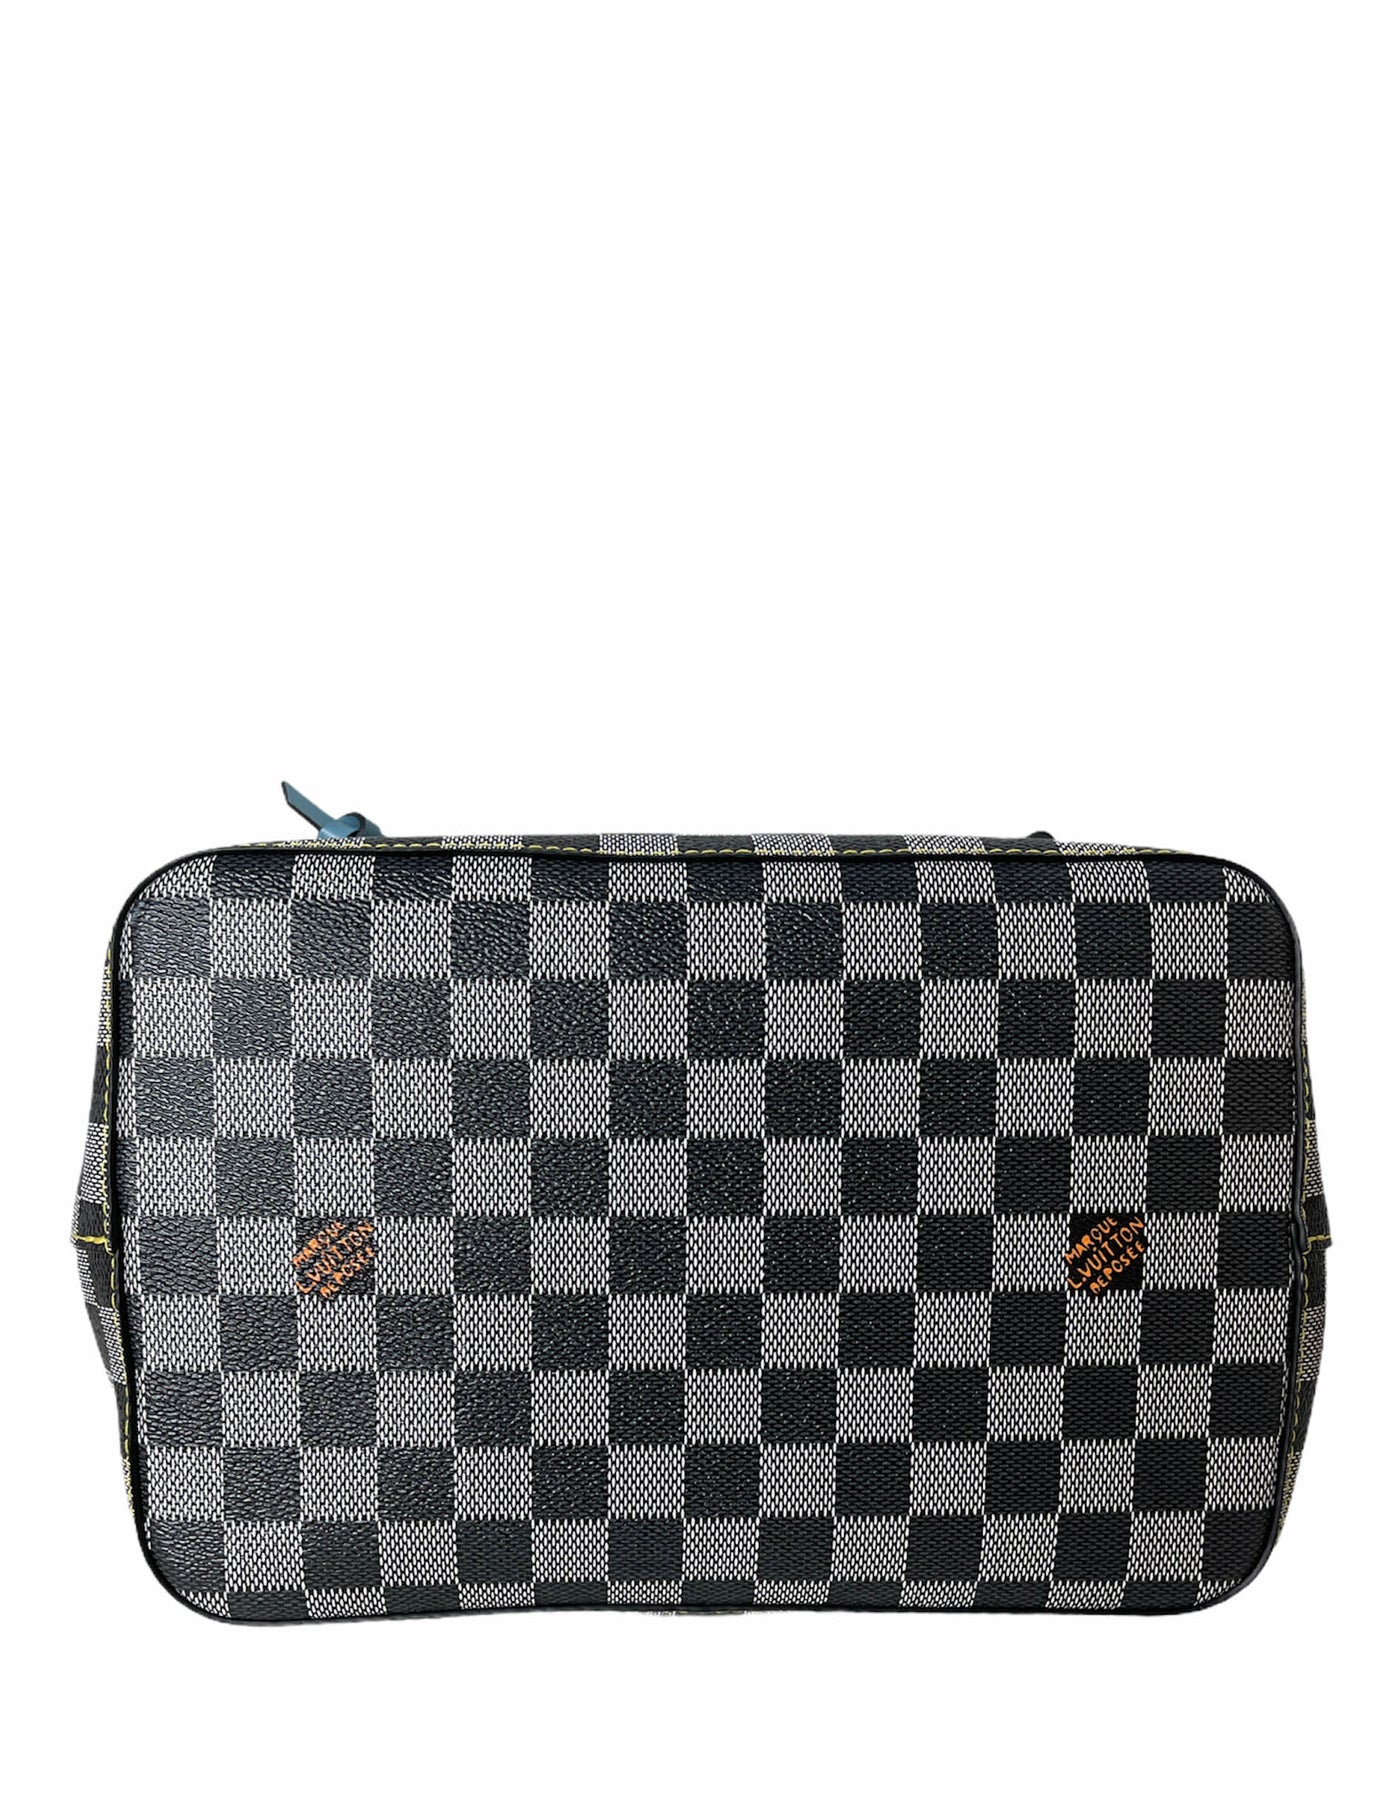 Louis Vuitton NeoNoe Damier Black/White in Coated Canvas/Leather